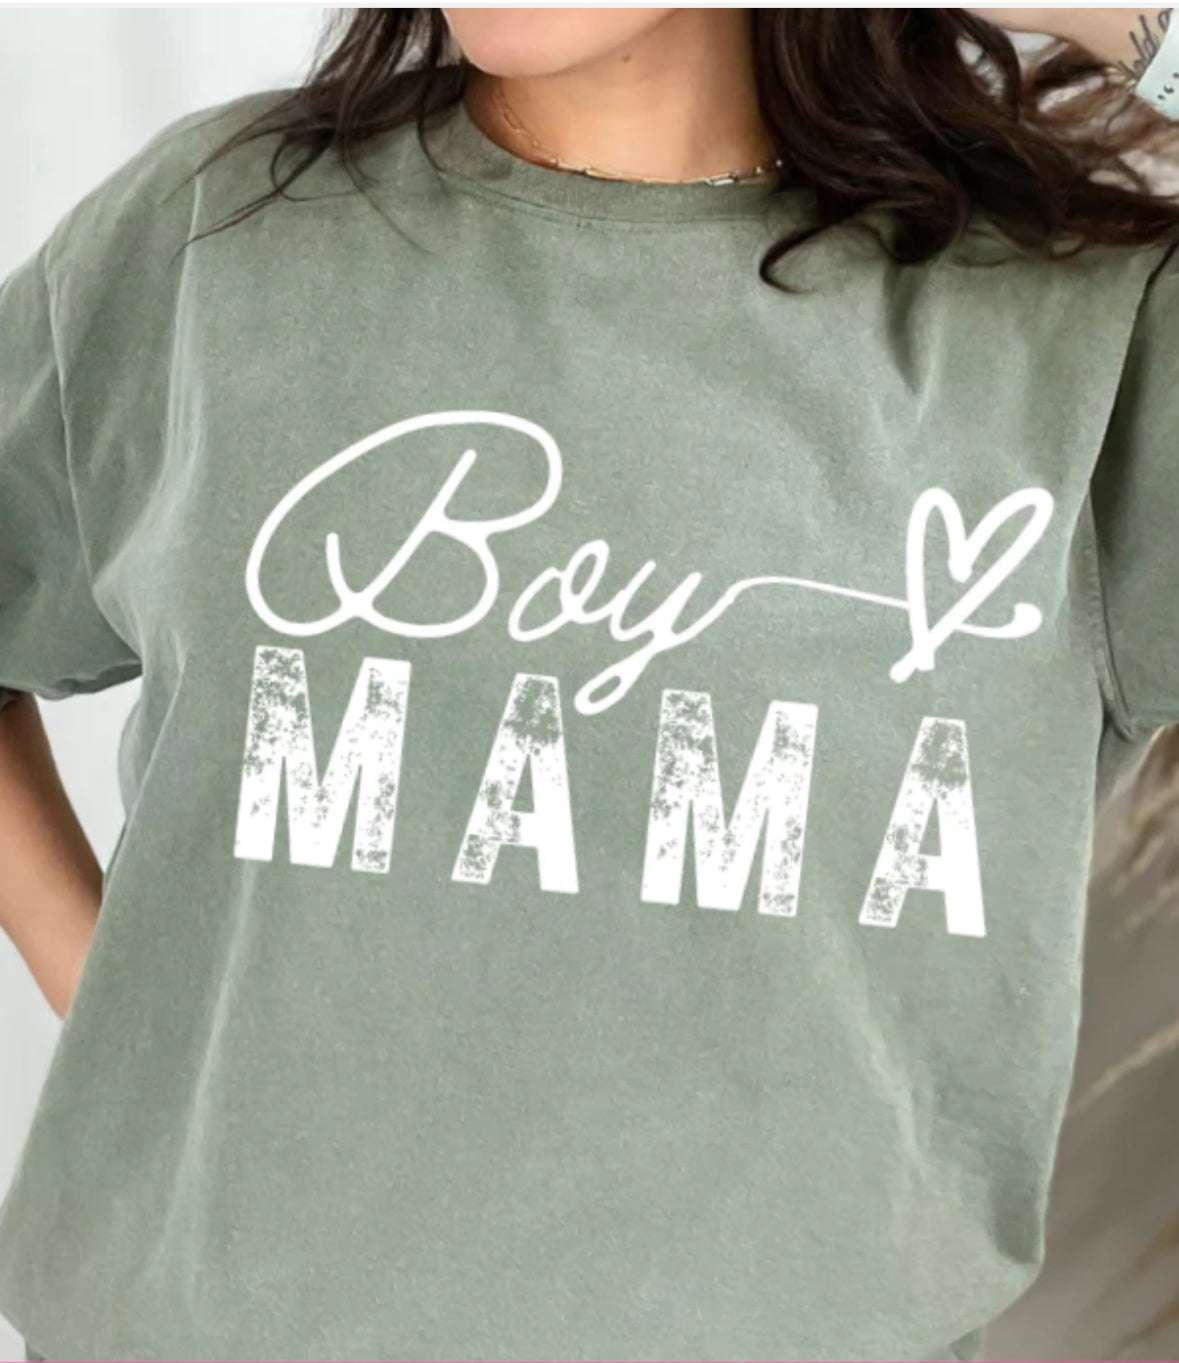 Heartfelt Style: 'Boy Mama' T-Shirt in Various Colors - Celebrate Motherhood Dress Your Story: Explore our Diverse T-shirt Collection - Humor, Inspiration, Professions, Retro, Boho, and Country Advocacy in Vibrant Colors, Sizes, and Styles T-Shirt 22 Daisy Designs & Creations LLC